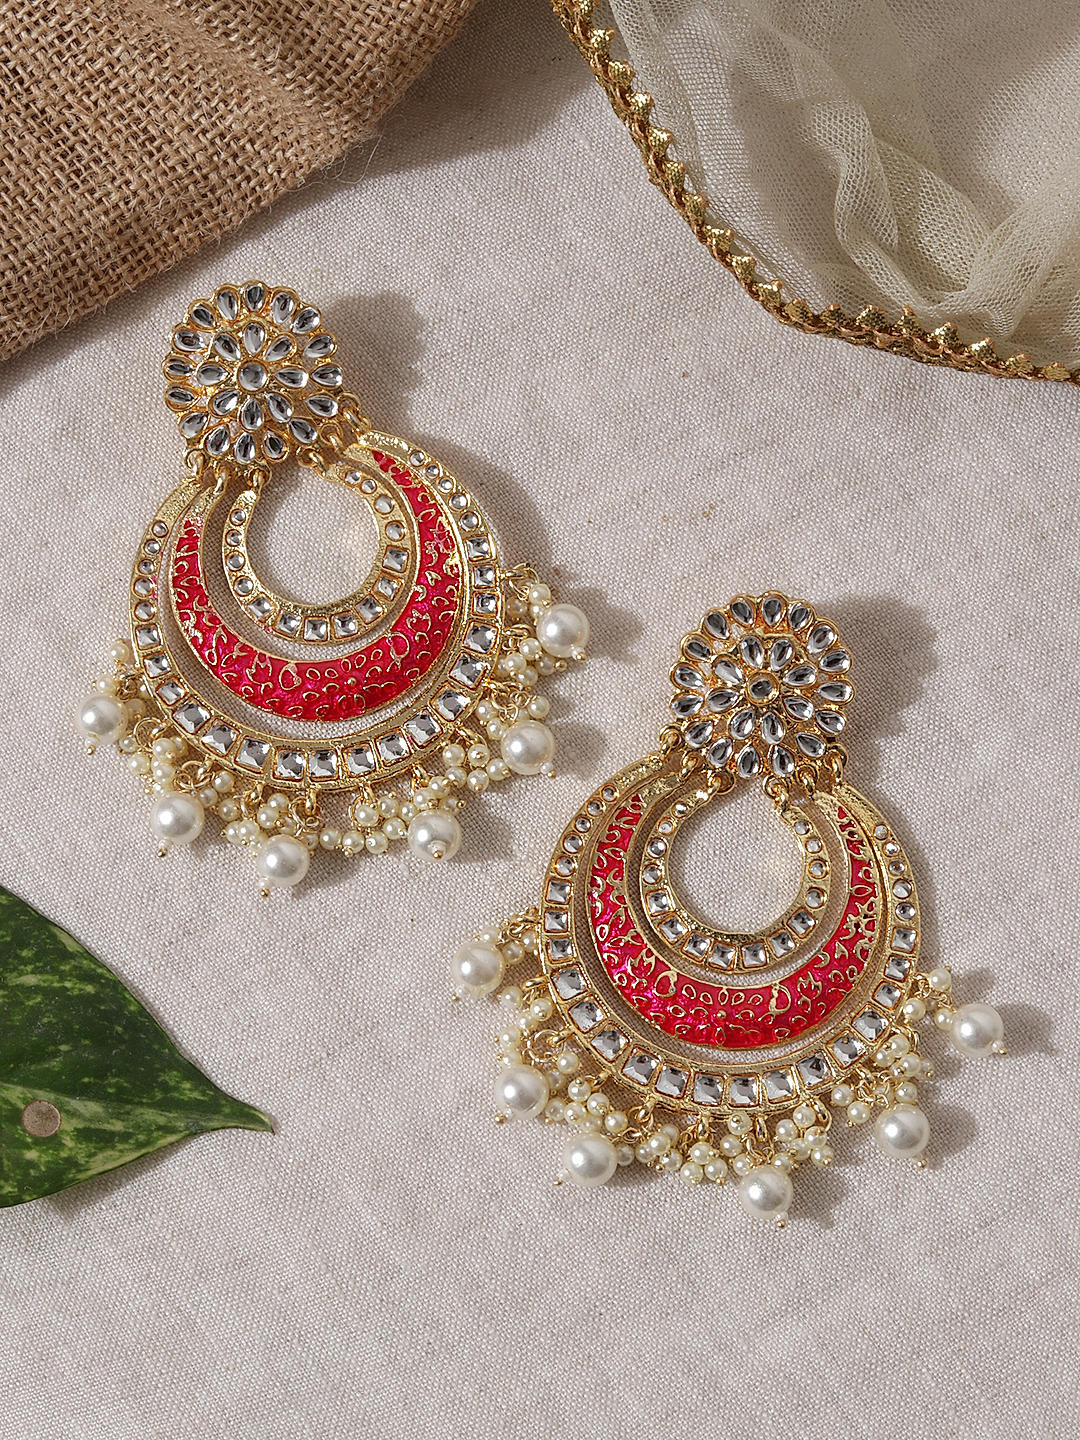 Details more than 127 red earrings for wedding best